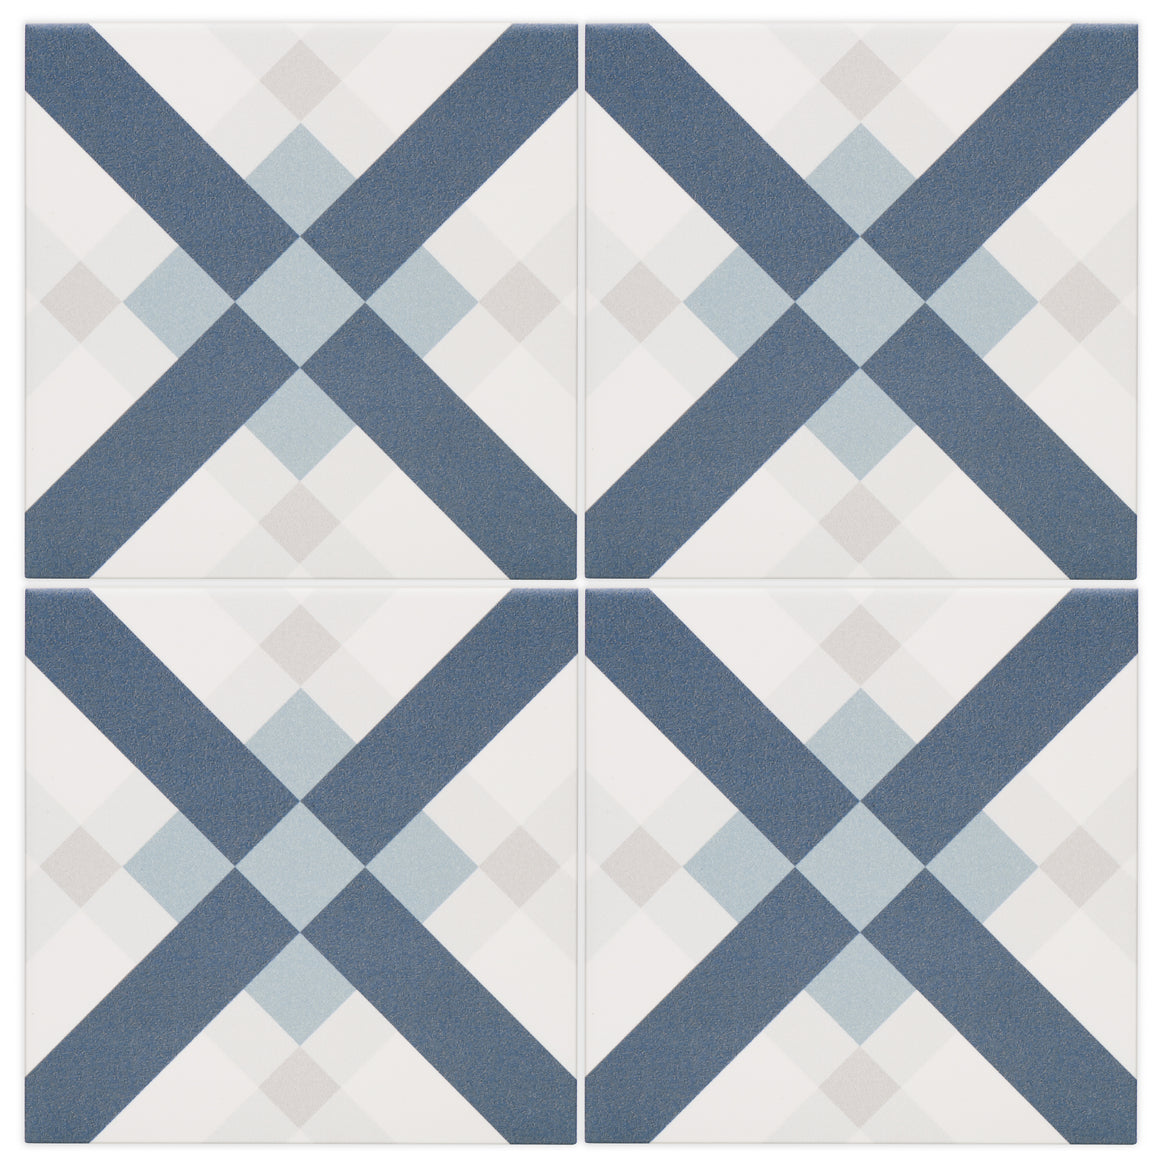 Tesseract Blue, Grey, White modern matte porcelain decorative pattern tile for residential bathroom and kitchen floor imported from Italy, Self more decor 4 available from TilesInspired Canada's Online Tile Store delivering across Ontario and Quebec, including Toronto, Montreal, Ottawa, London, Windsor, Kitchener, Muskoka, Barrie, Kingston, Hamilton, and Niagara decoration idea